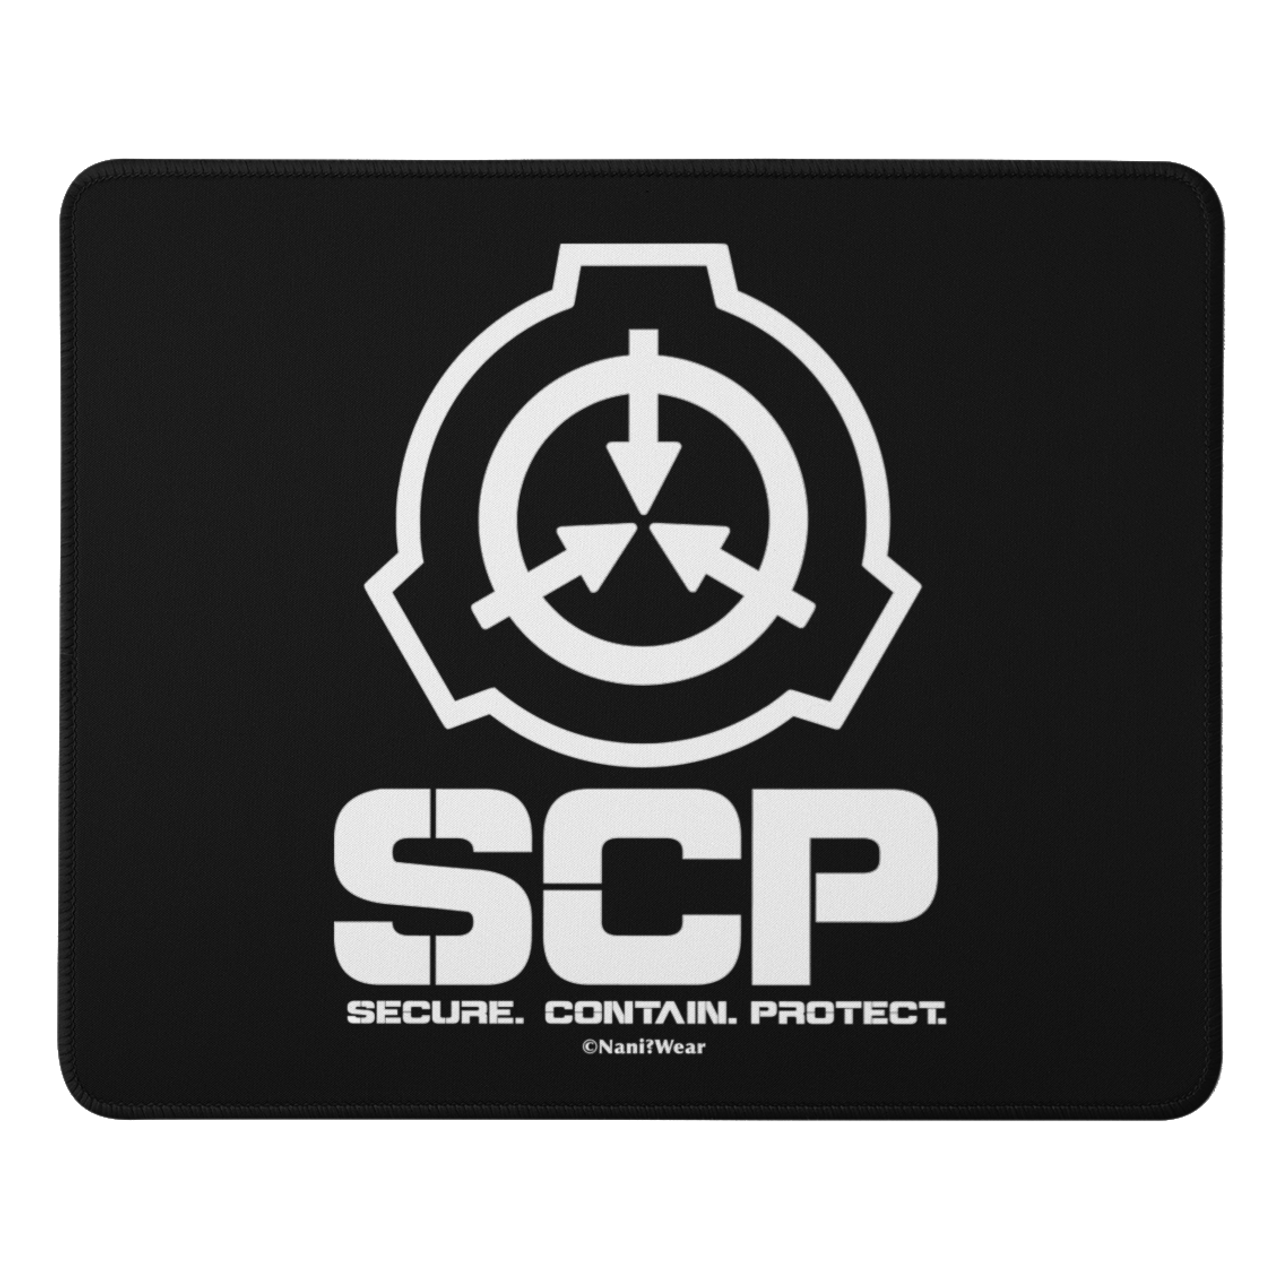 About the SCP Foundation